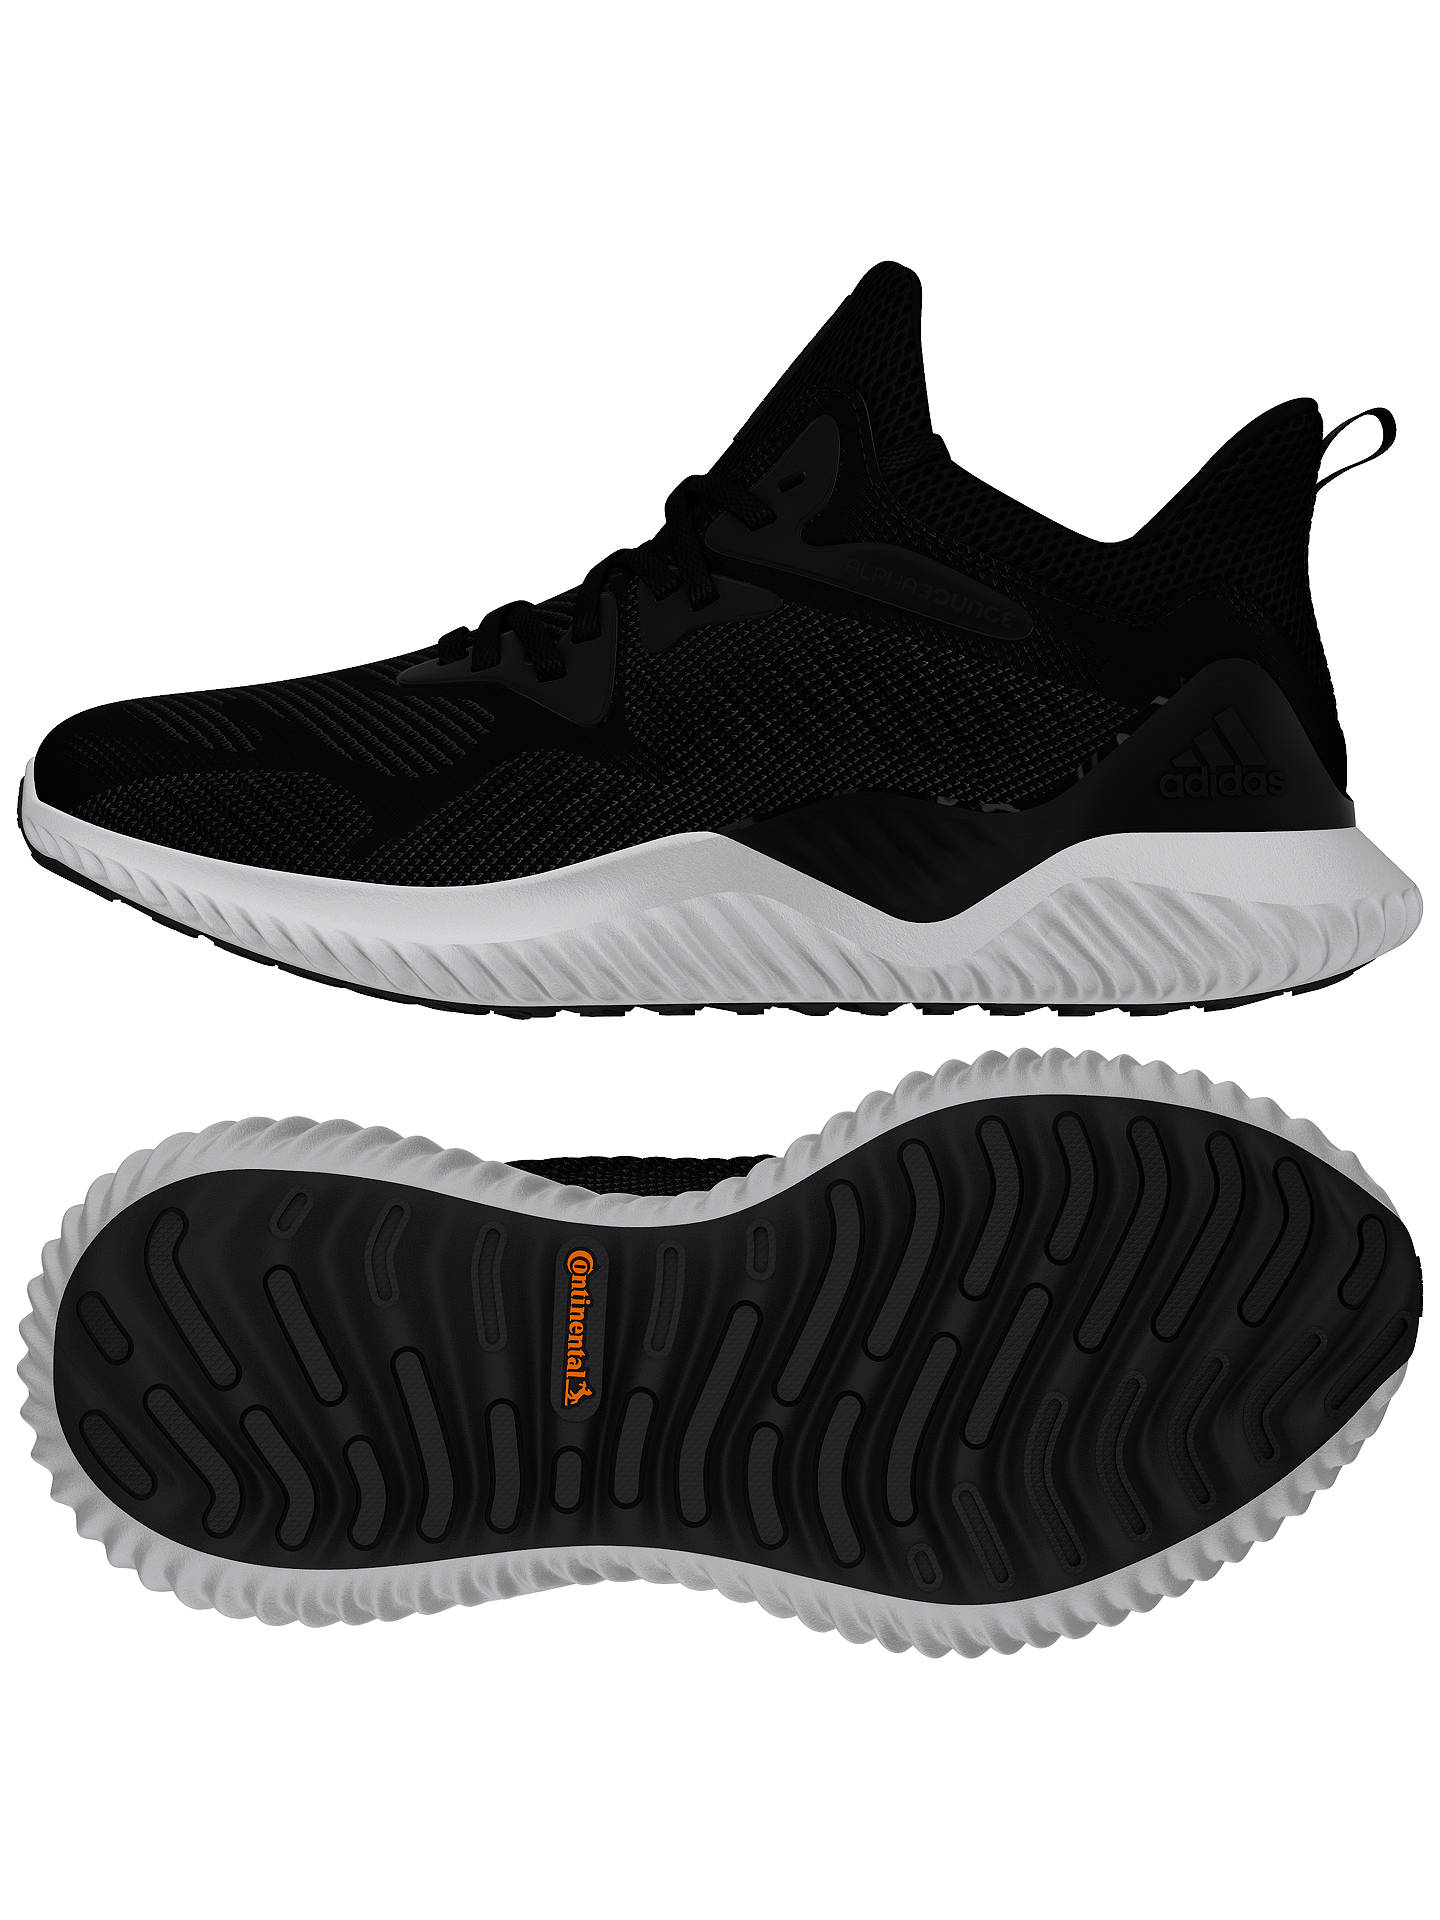 adidas alphabounce beyond women s review 905eb0